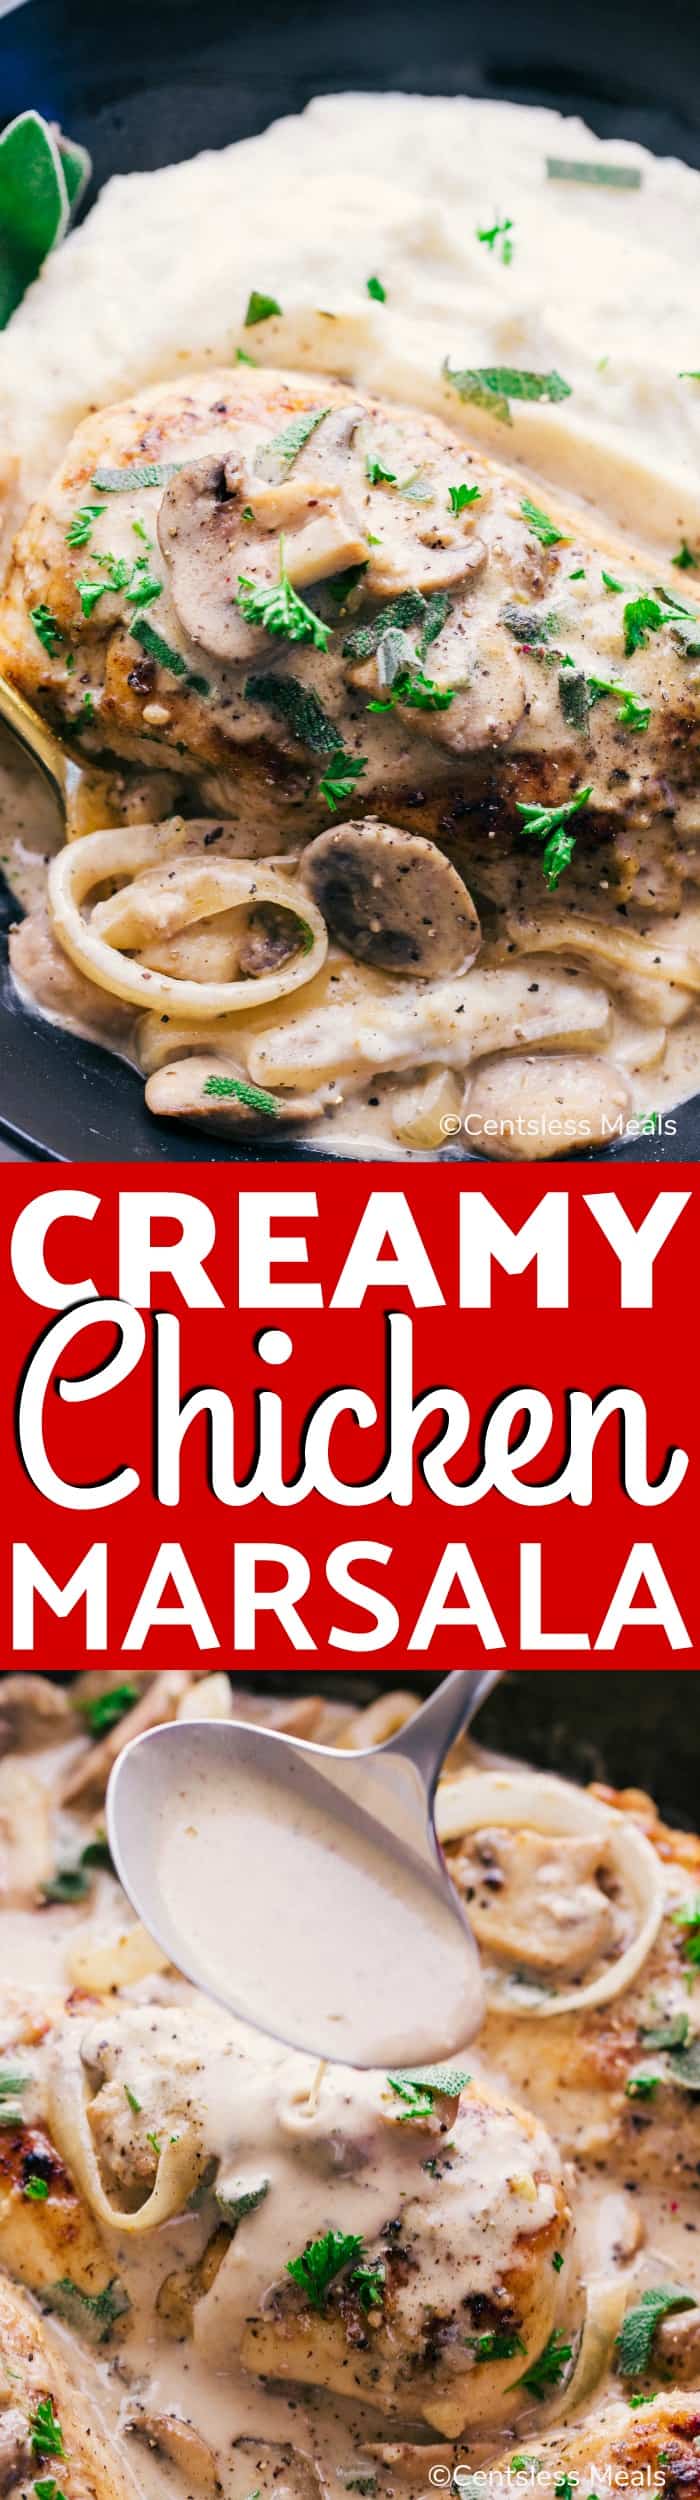 Creamy chicken marsala on a plate with a title